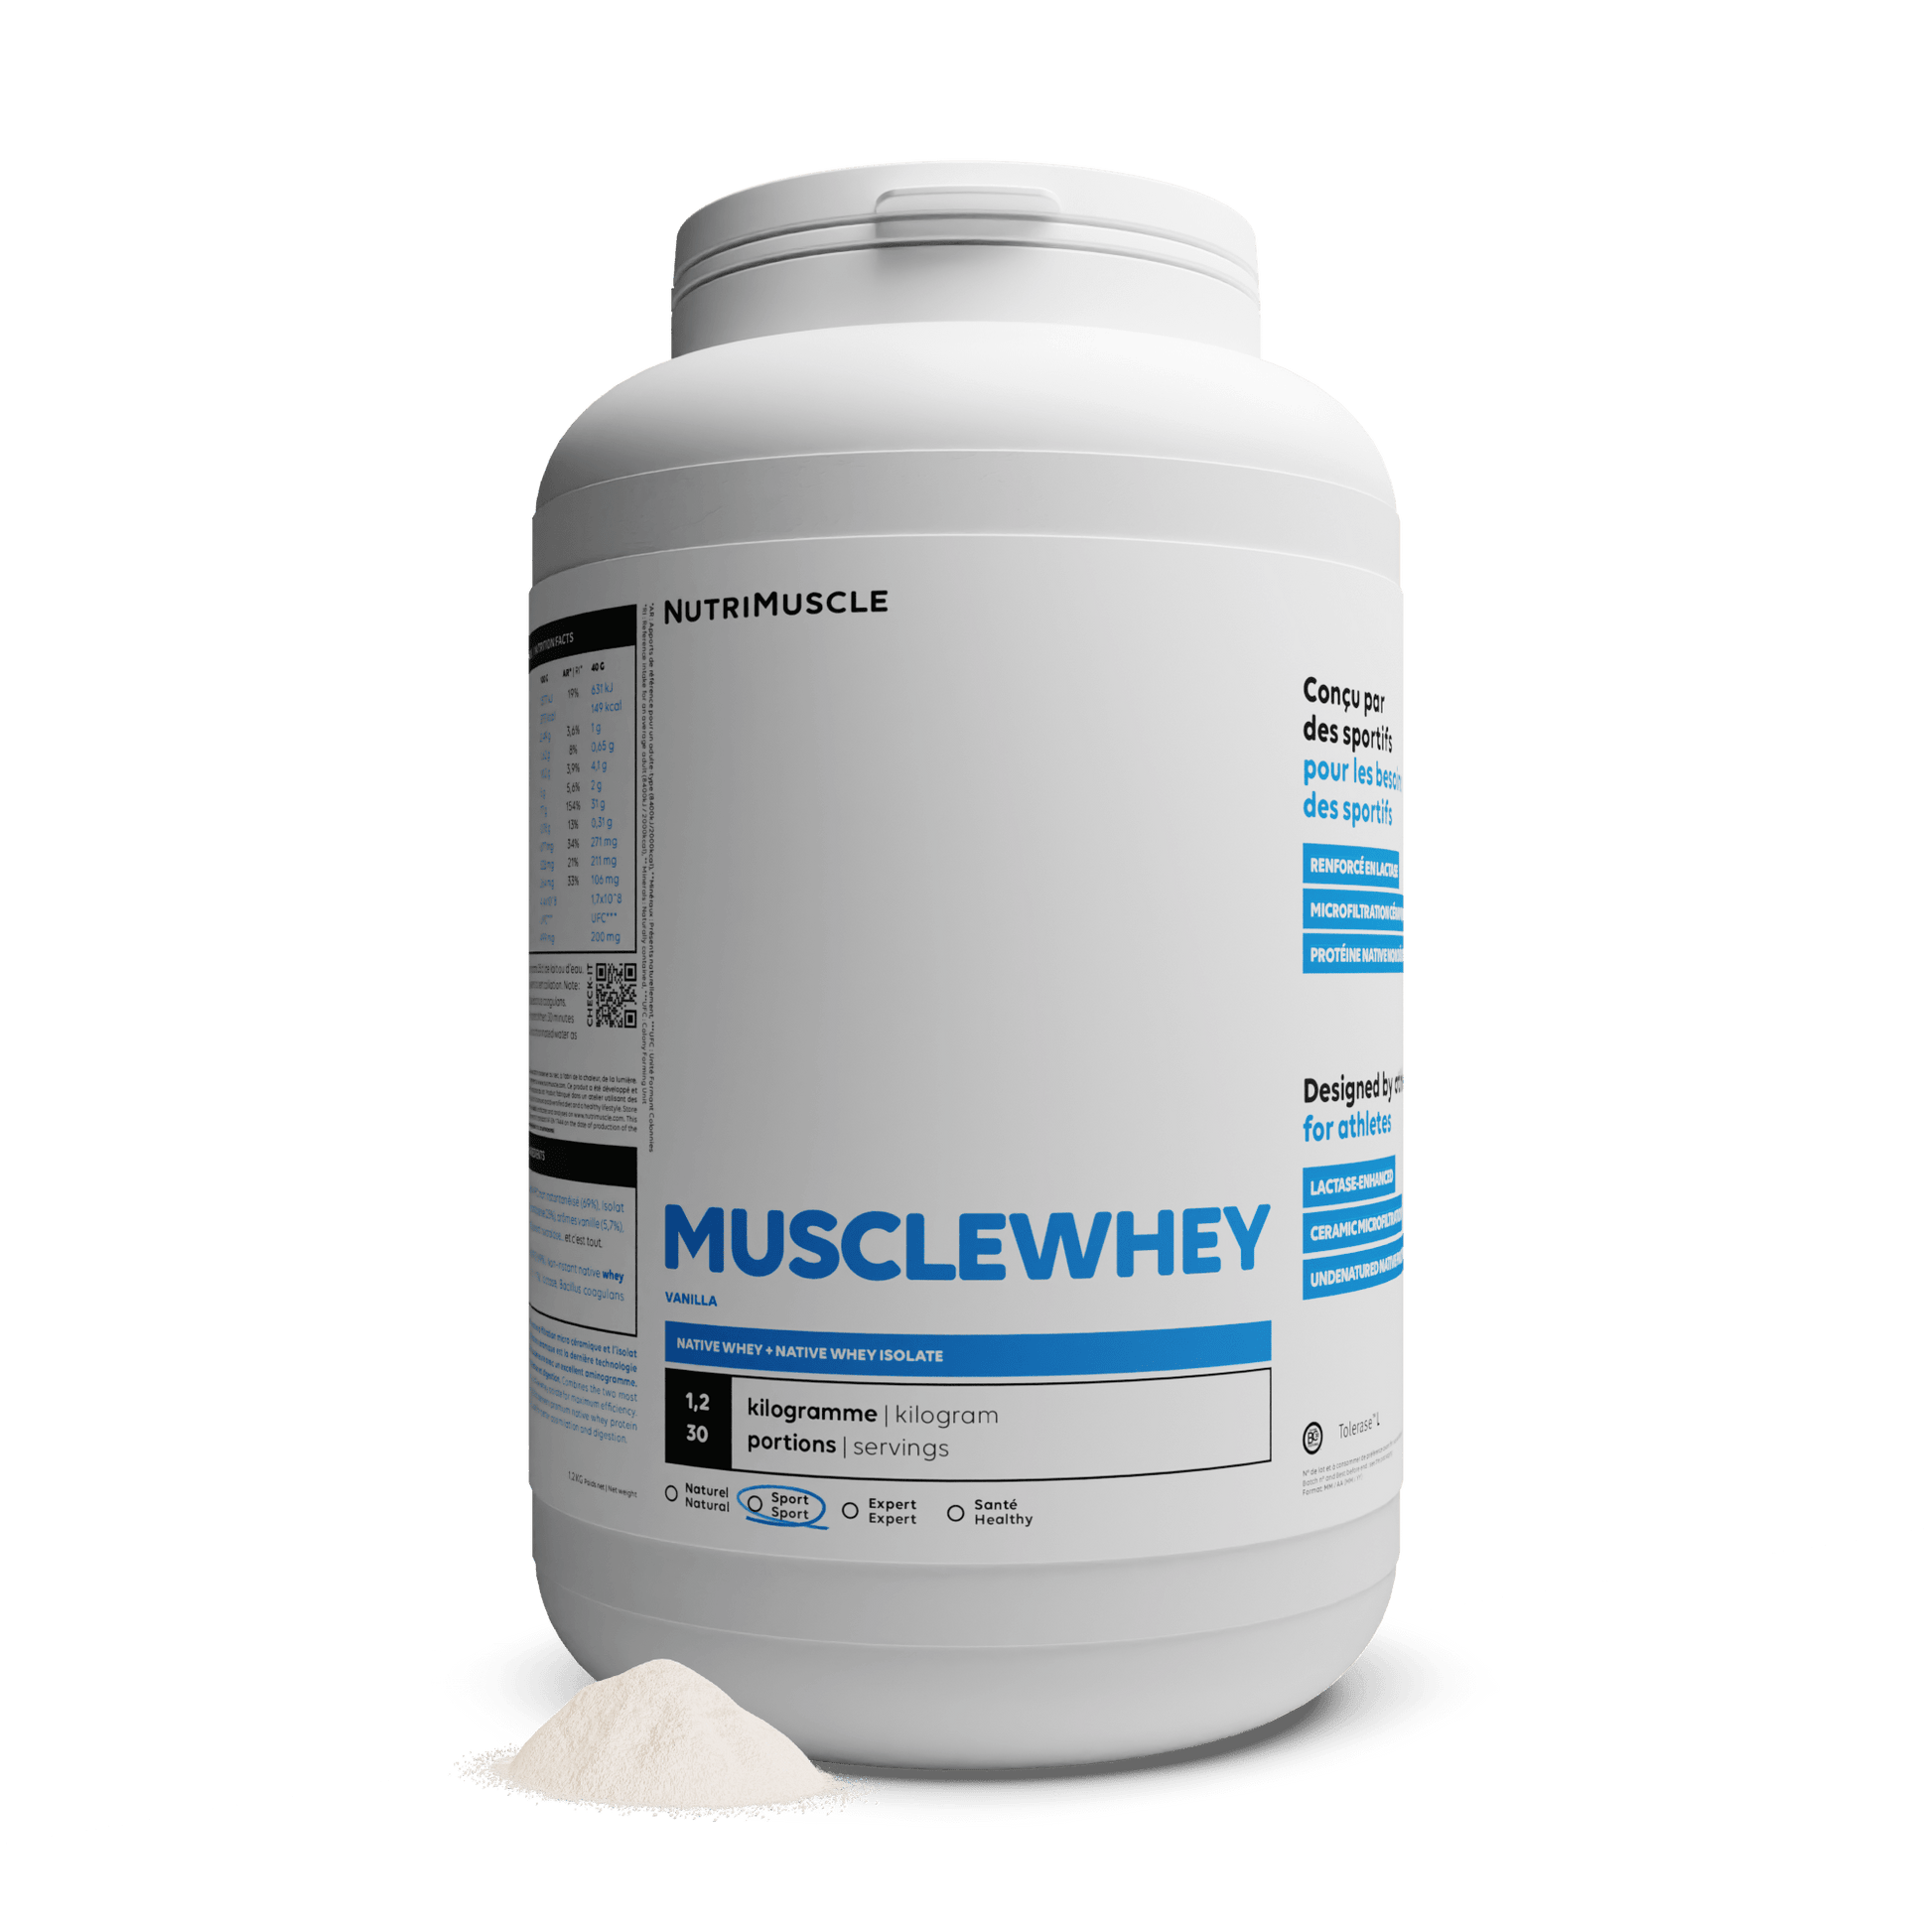 Nutrimuscle Protéines Vanille / 1.20 kg Musclewhey - Mix Protein